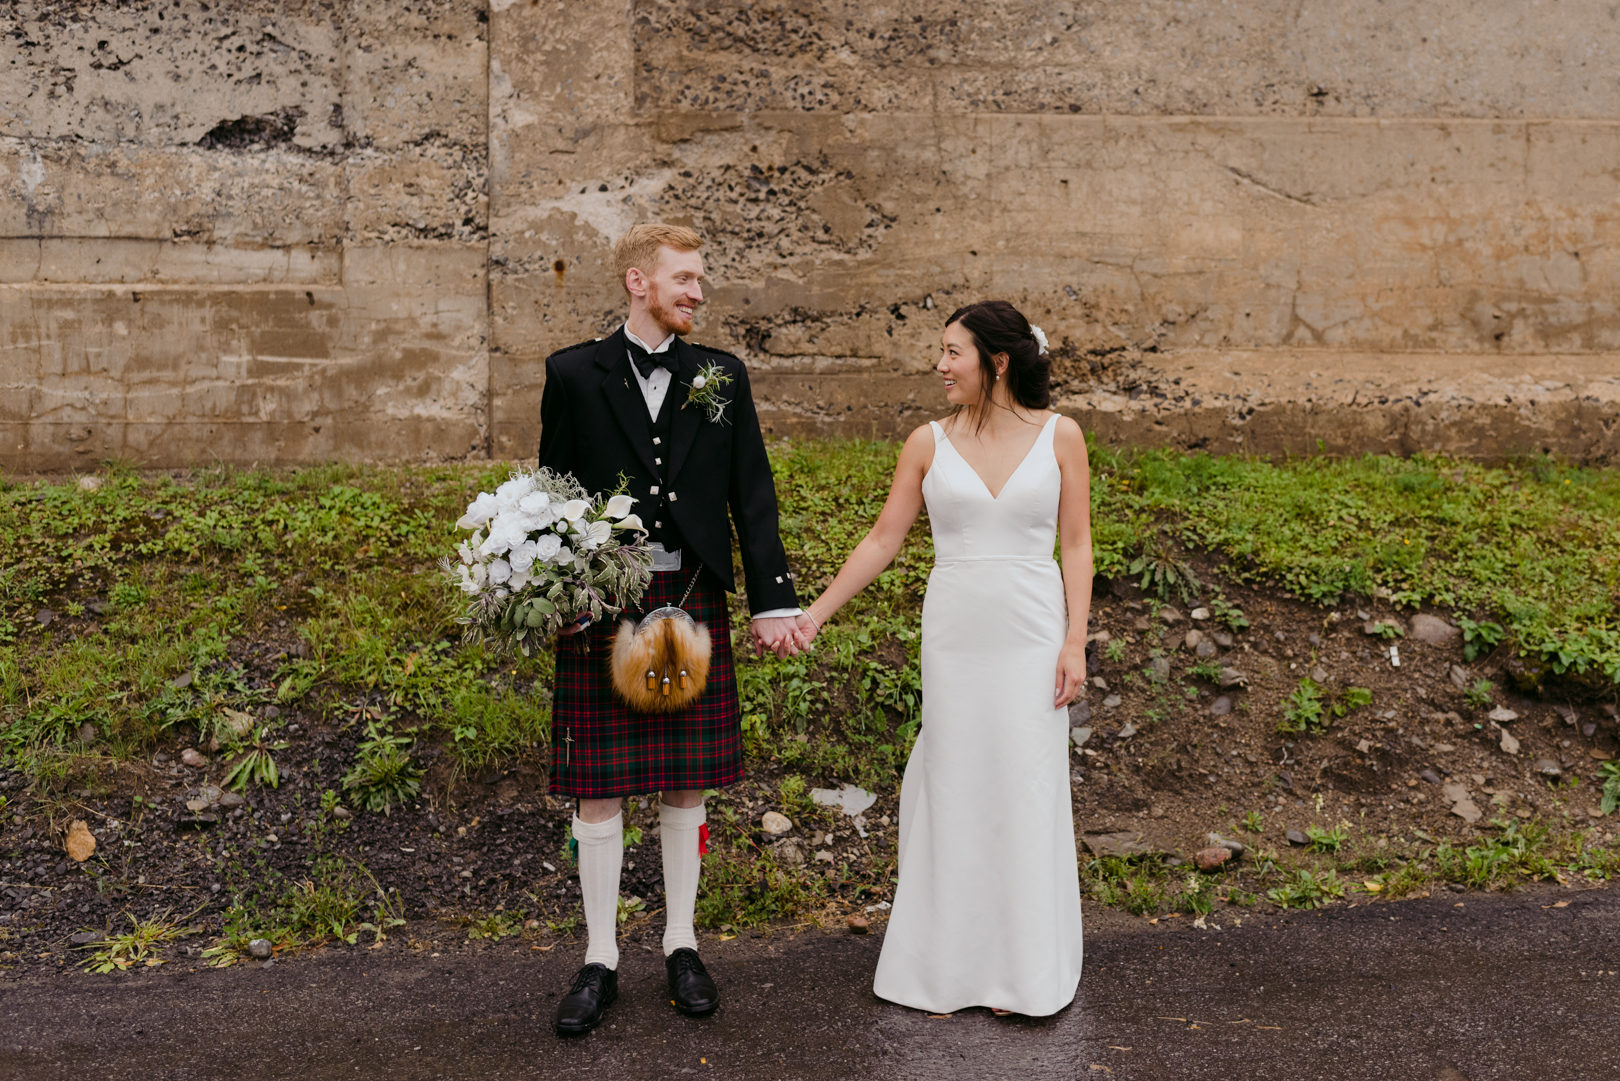 groom holding bouquet wearing a kilt holding his bride's hand